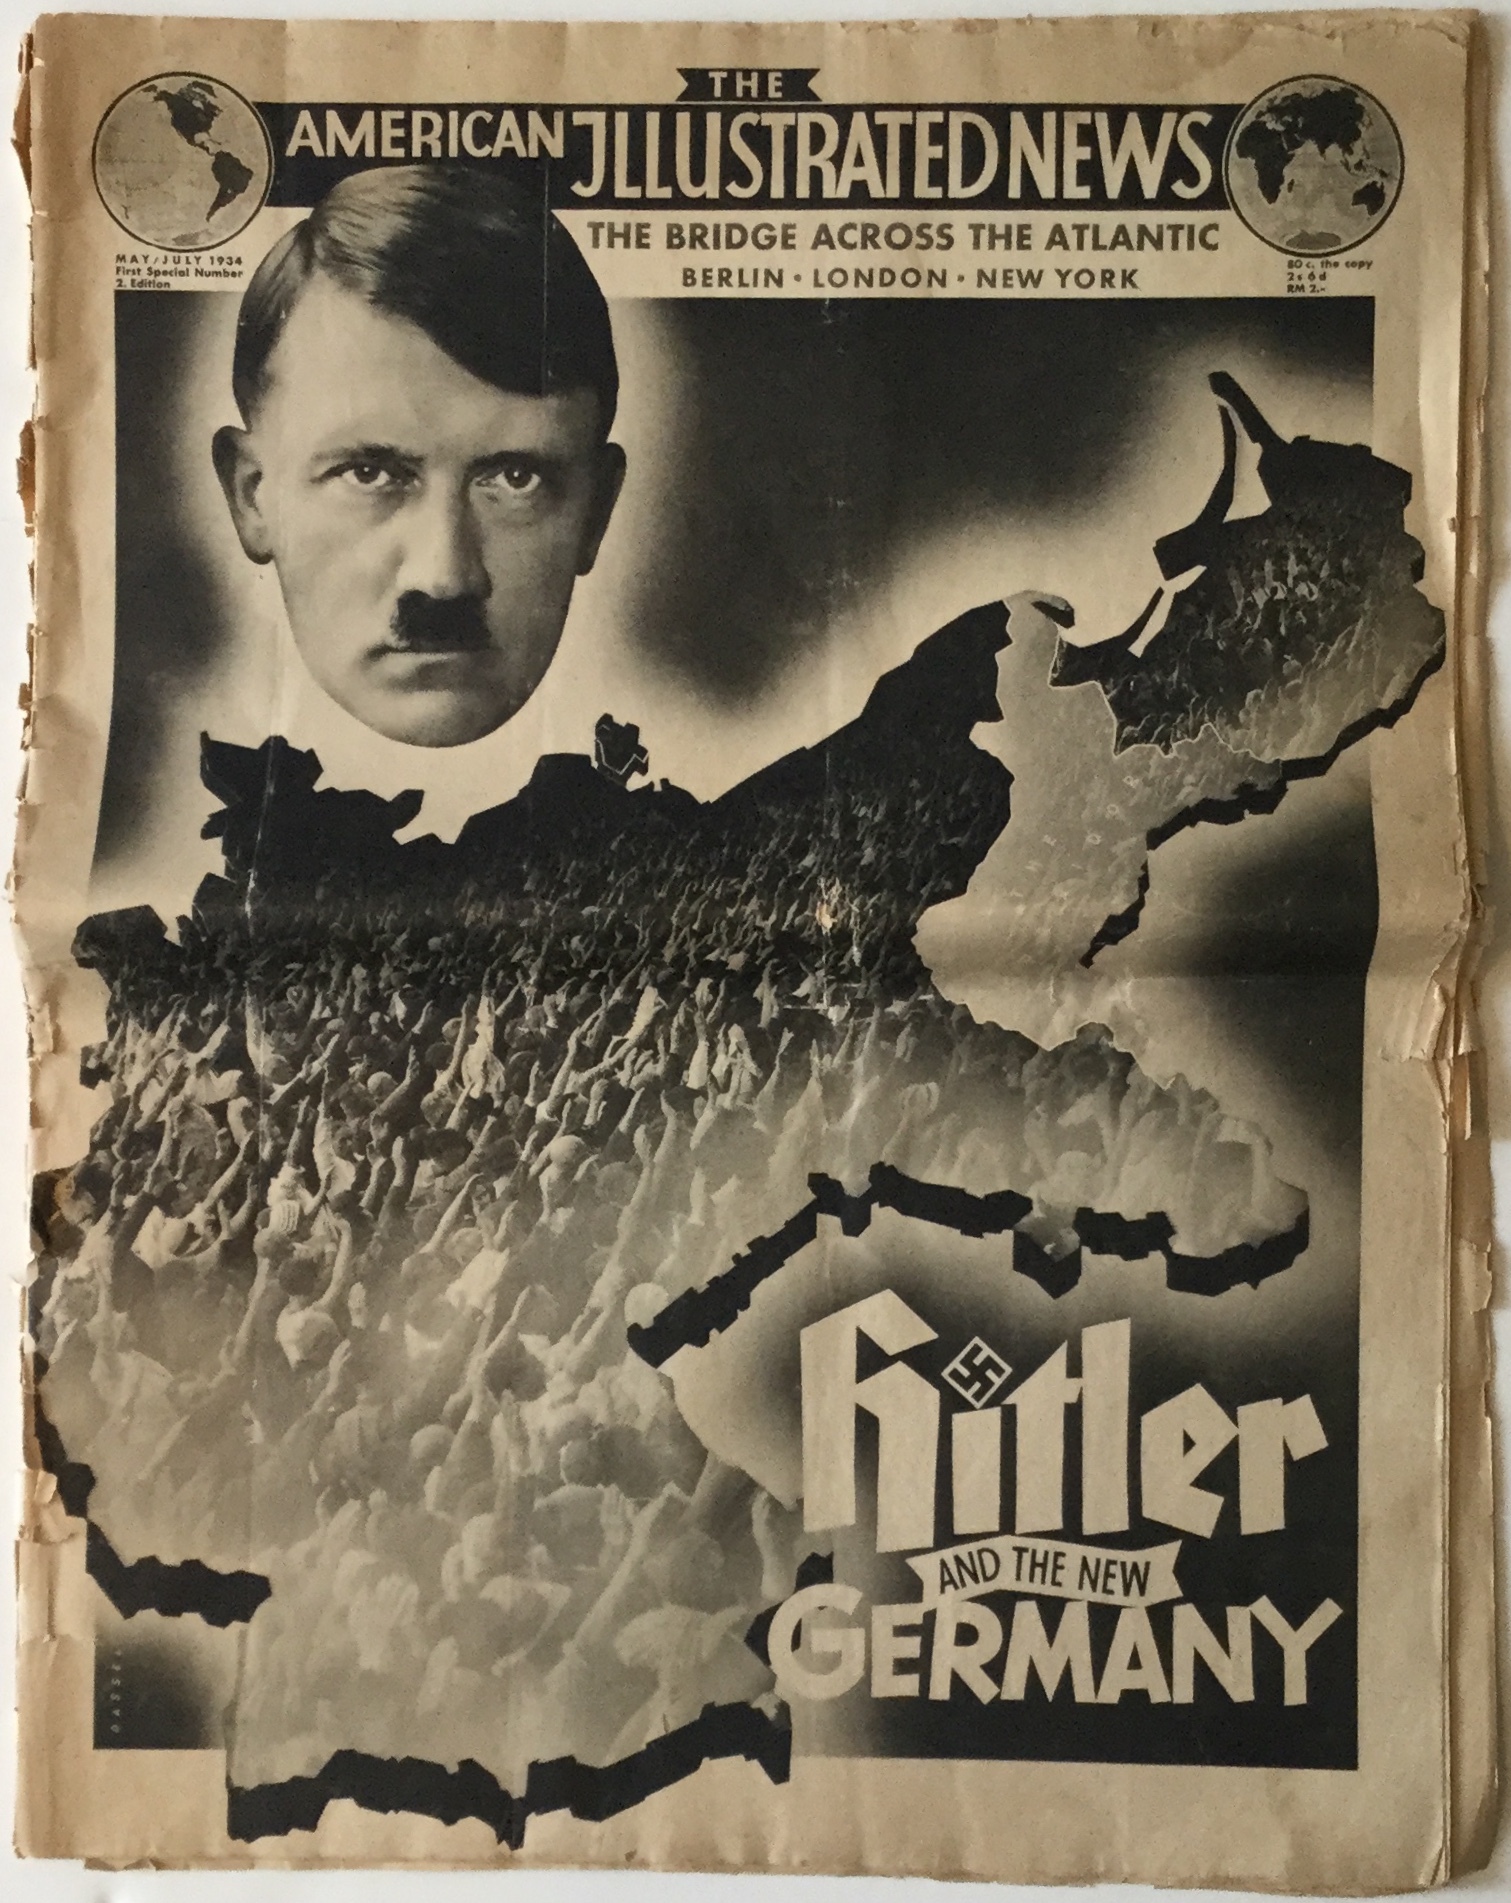 WW585 HITLER AND THE NEW GERMANY - AMERICAN ILLUSTRATED NEWS, MAY-JULY 1934